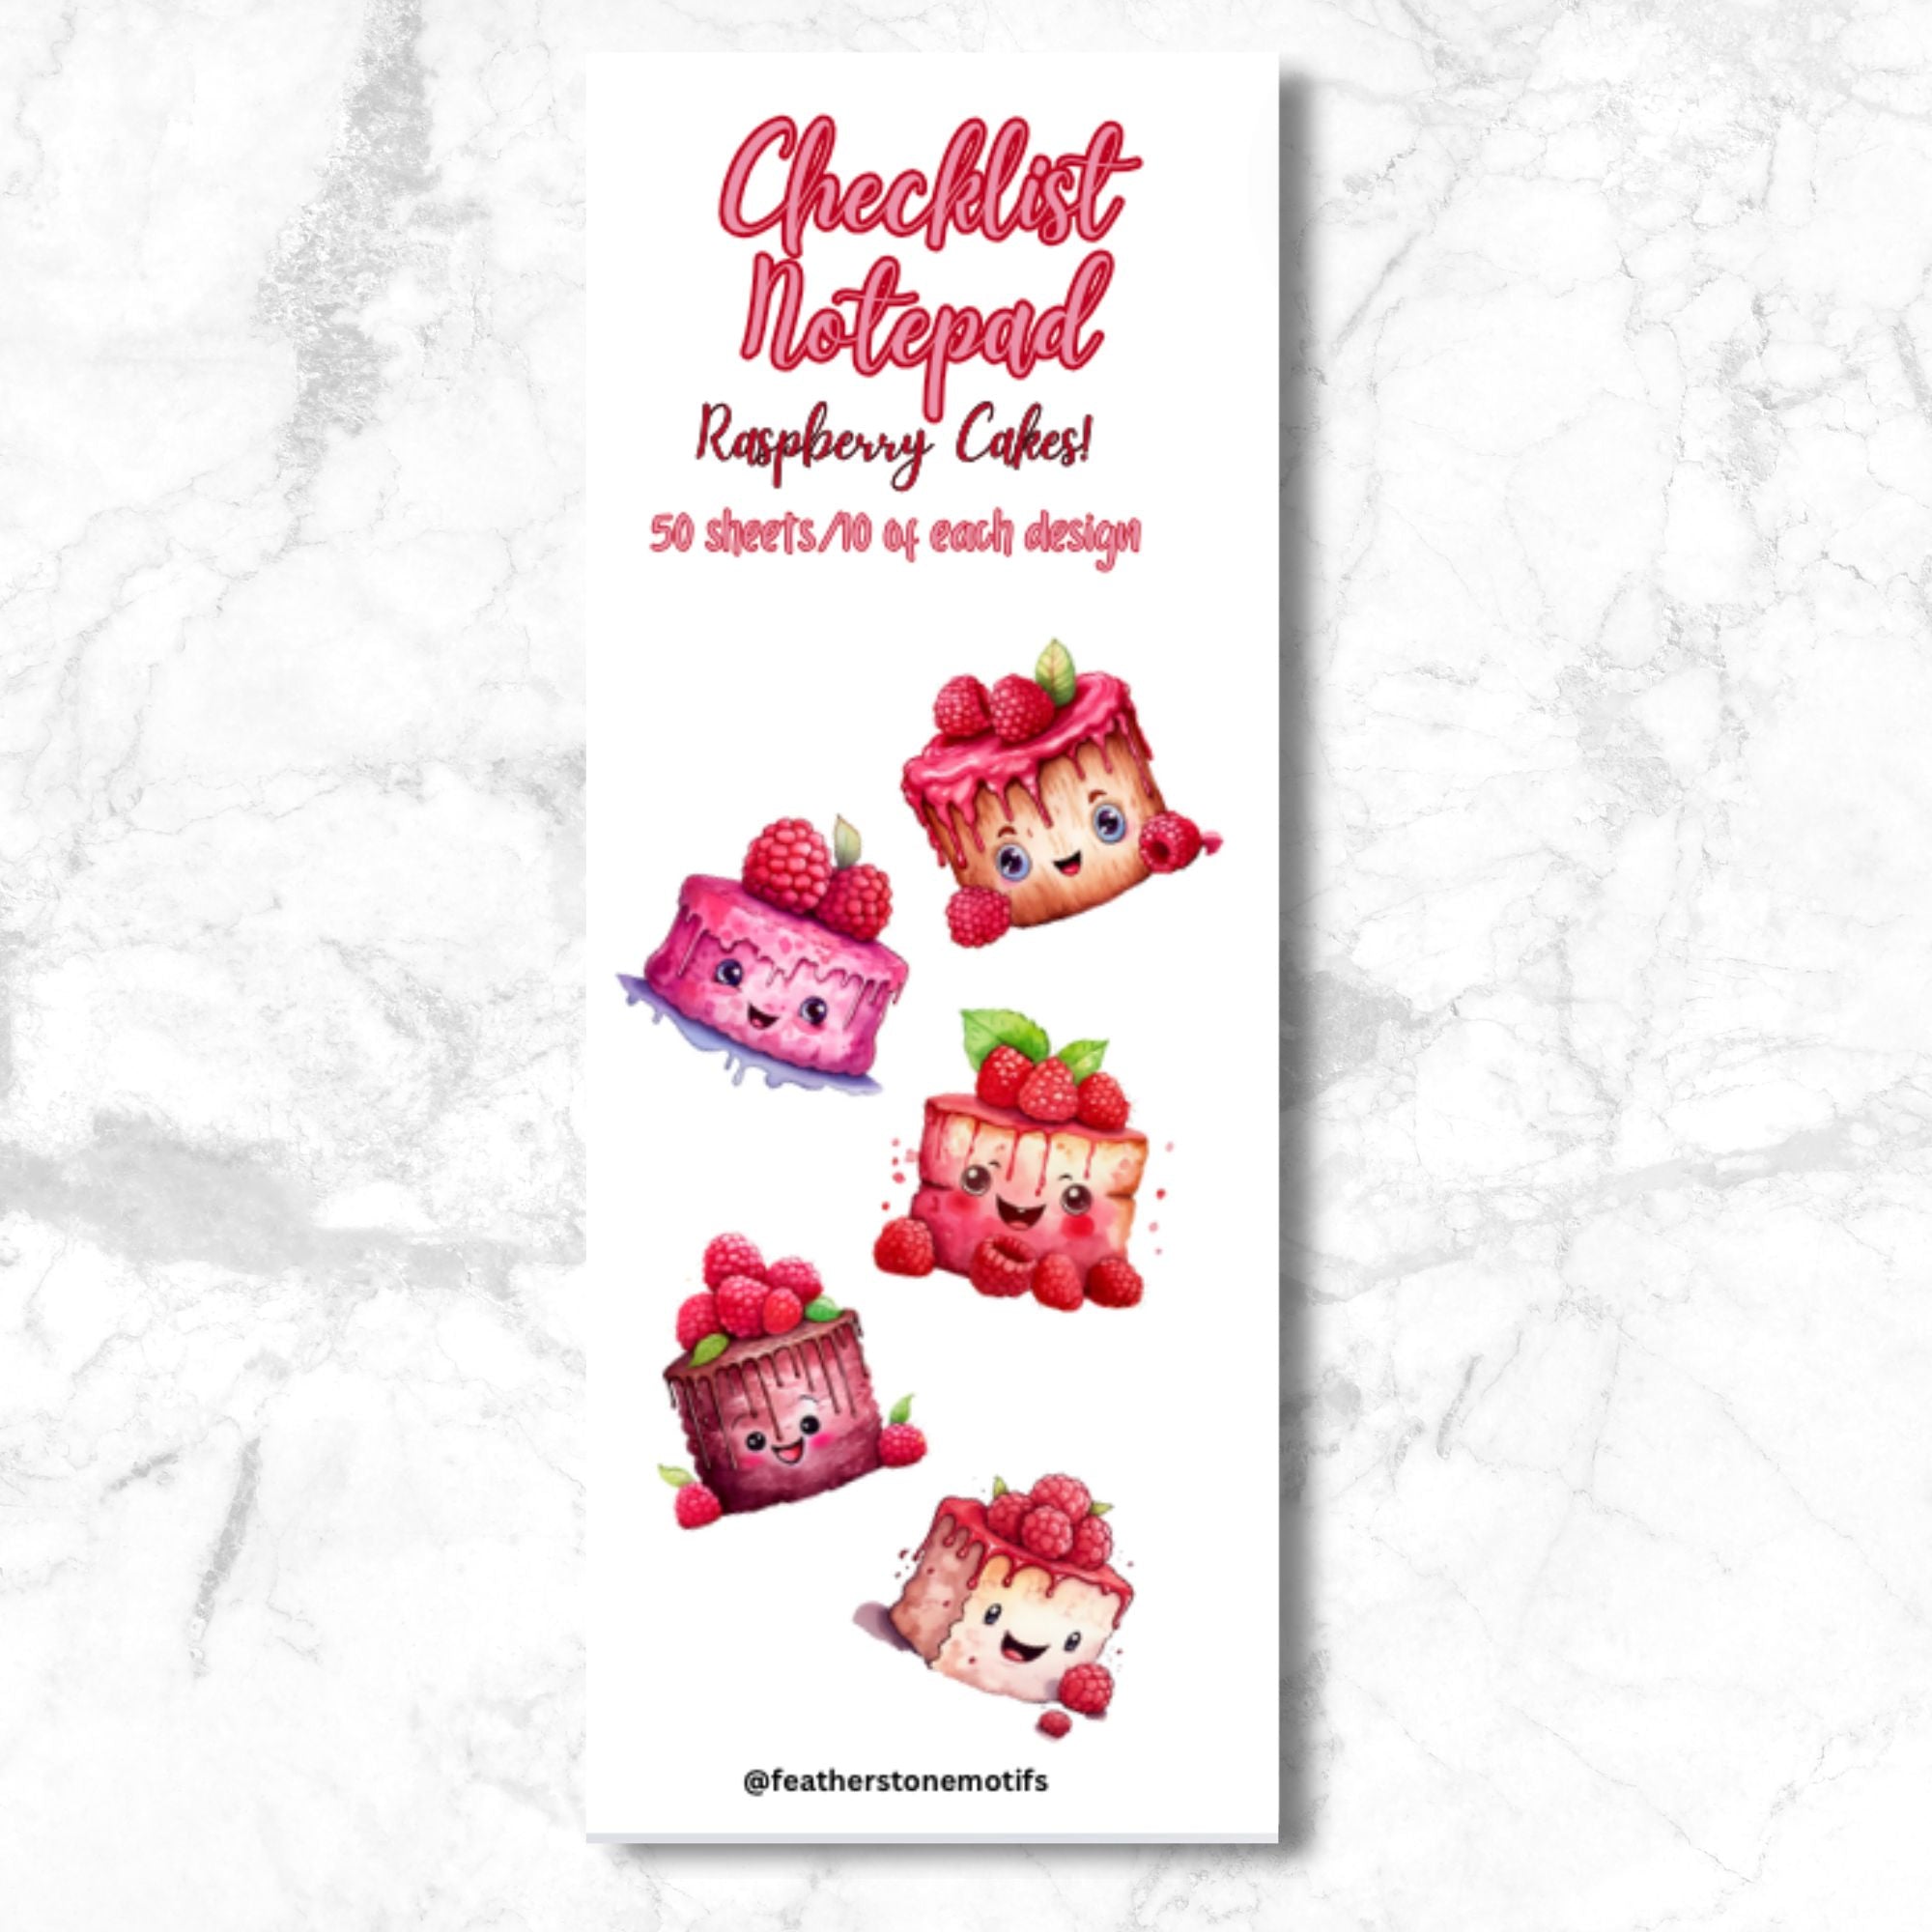 This image shows the cover of the Checklist Notepad - Raspberry Cakes.